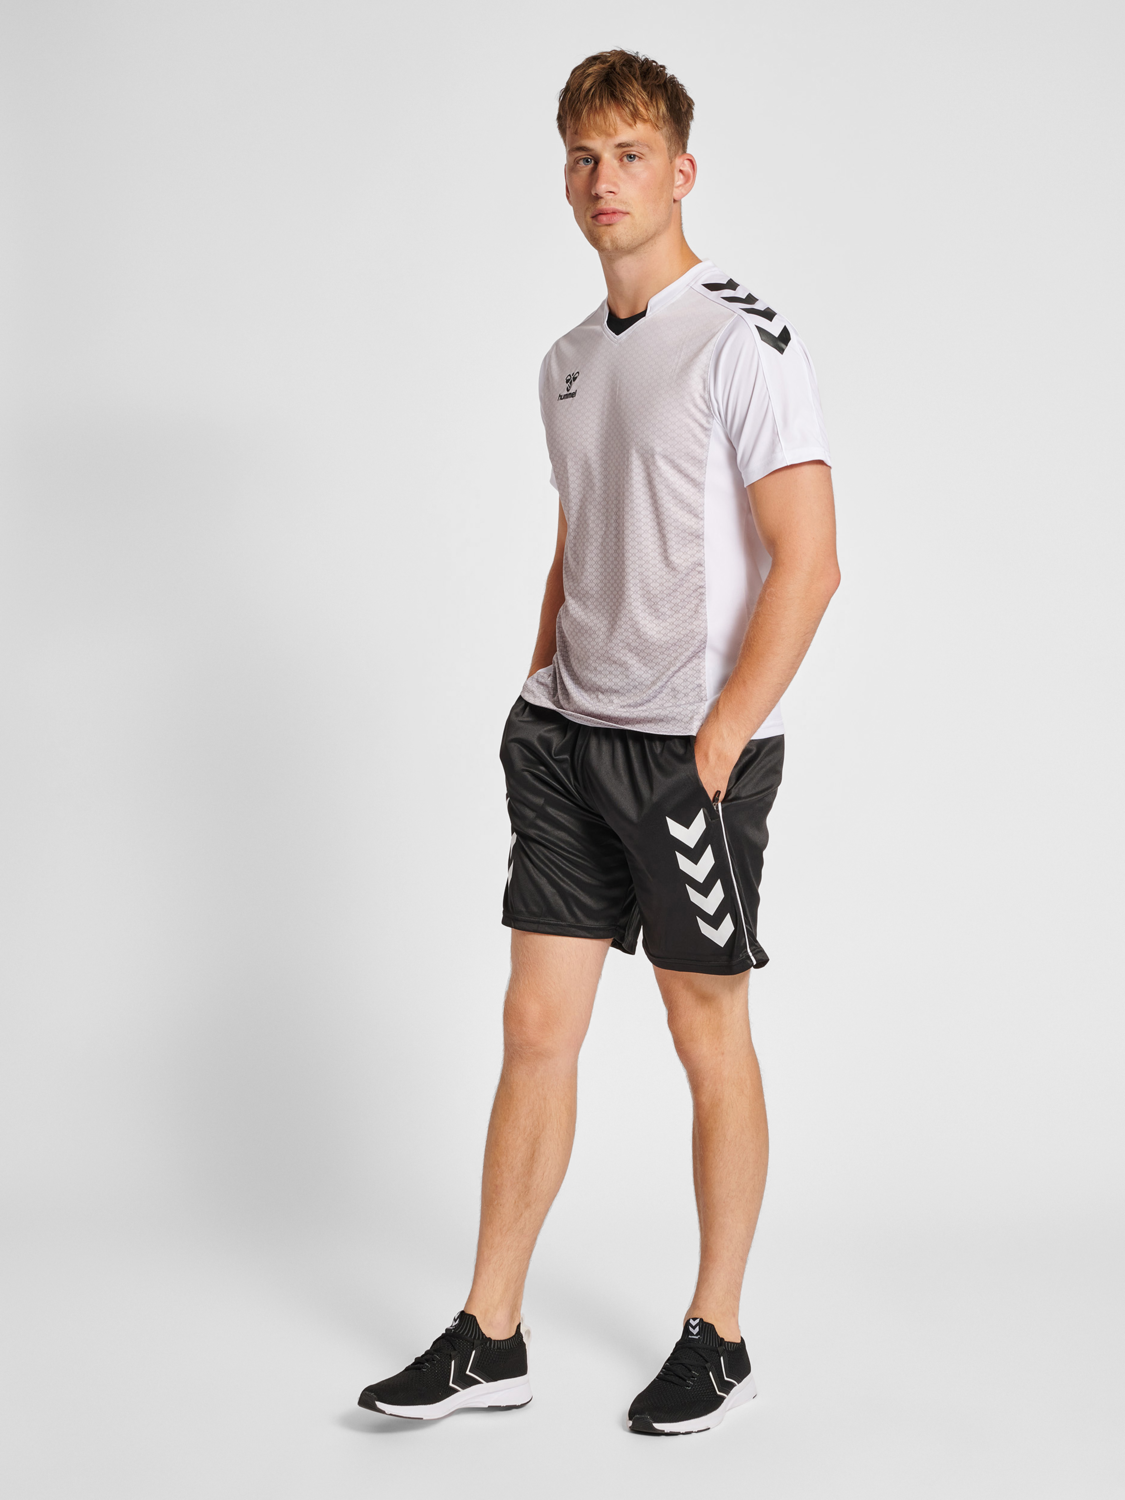 Details about   Hummel Football Soccer Lead Mens Sports Training Shorts White Grey 